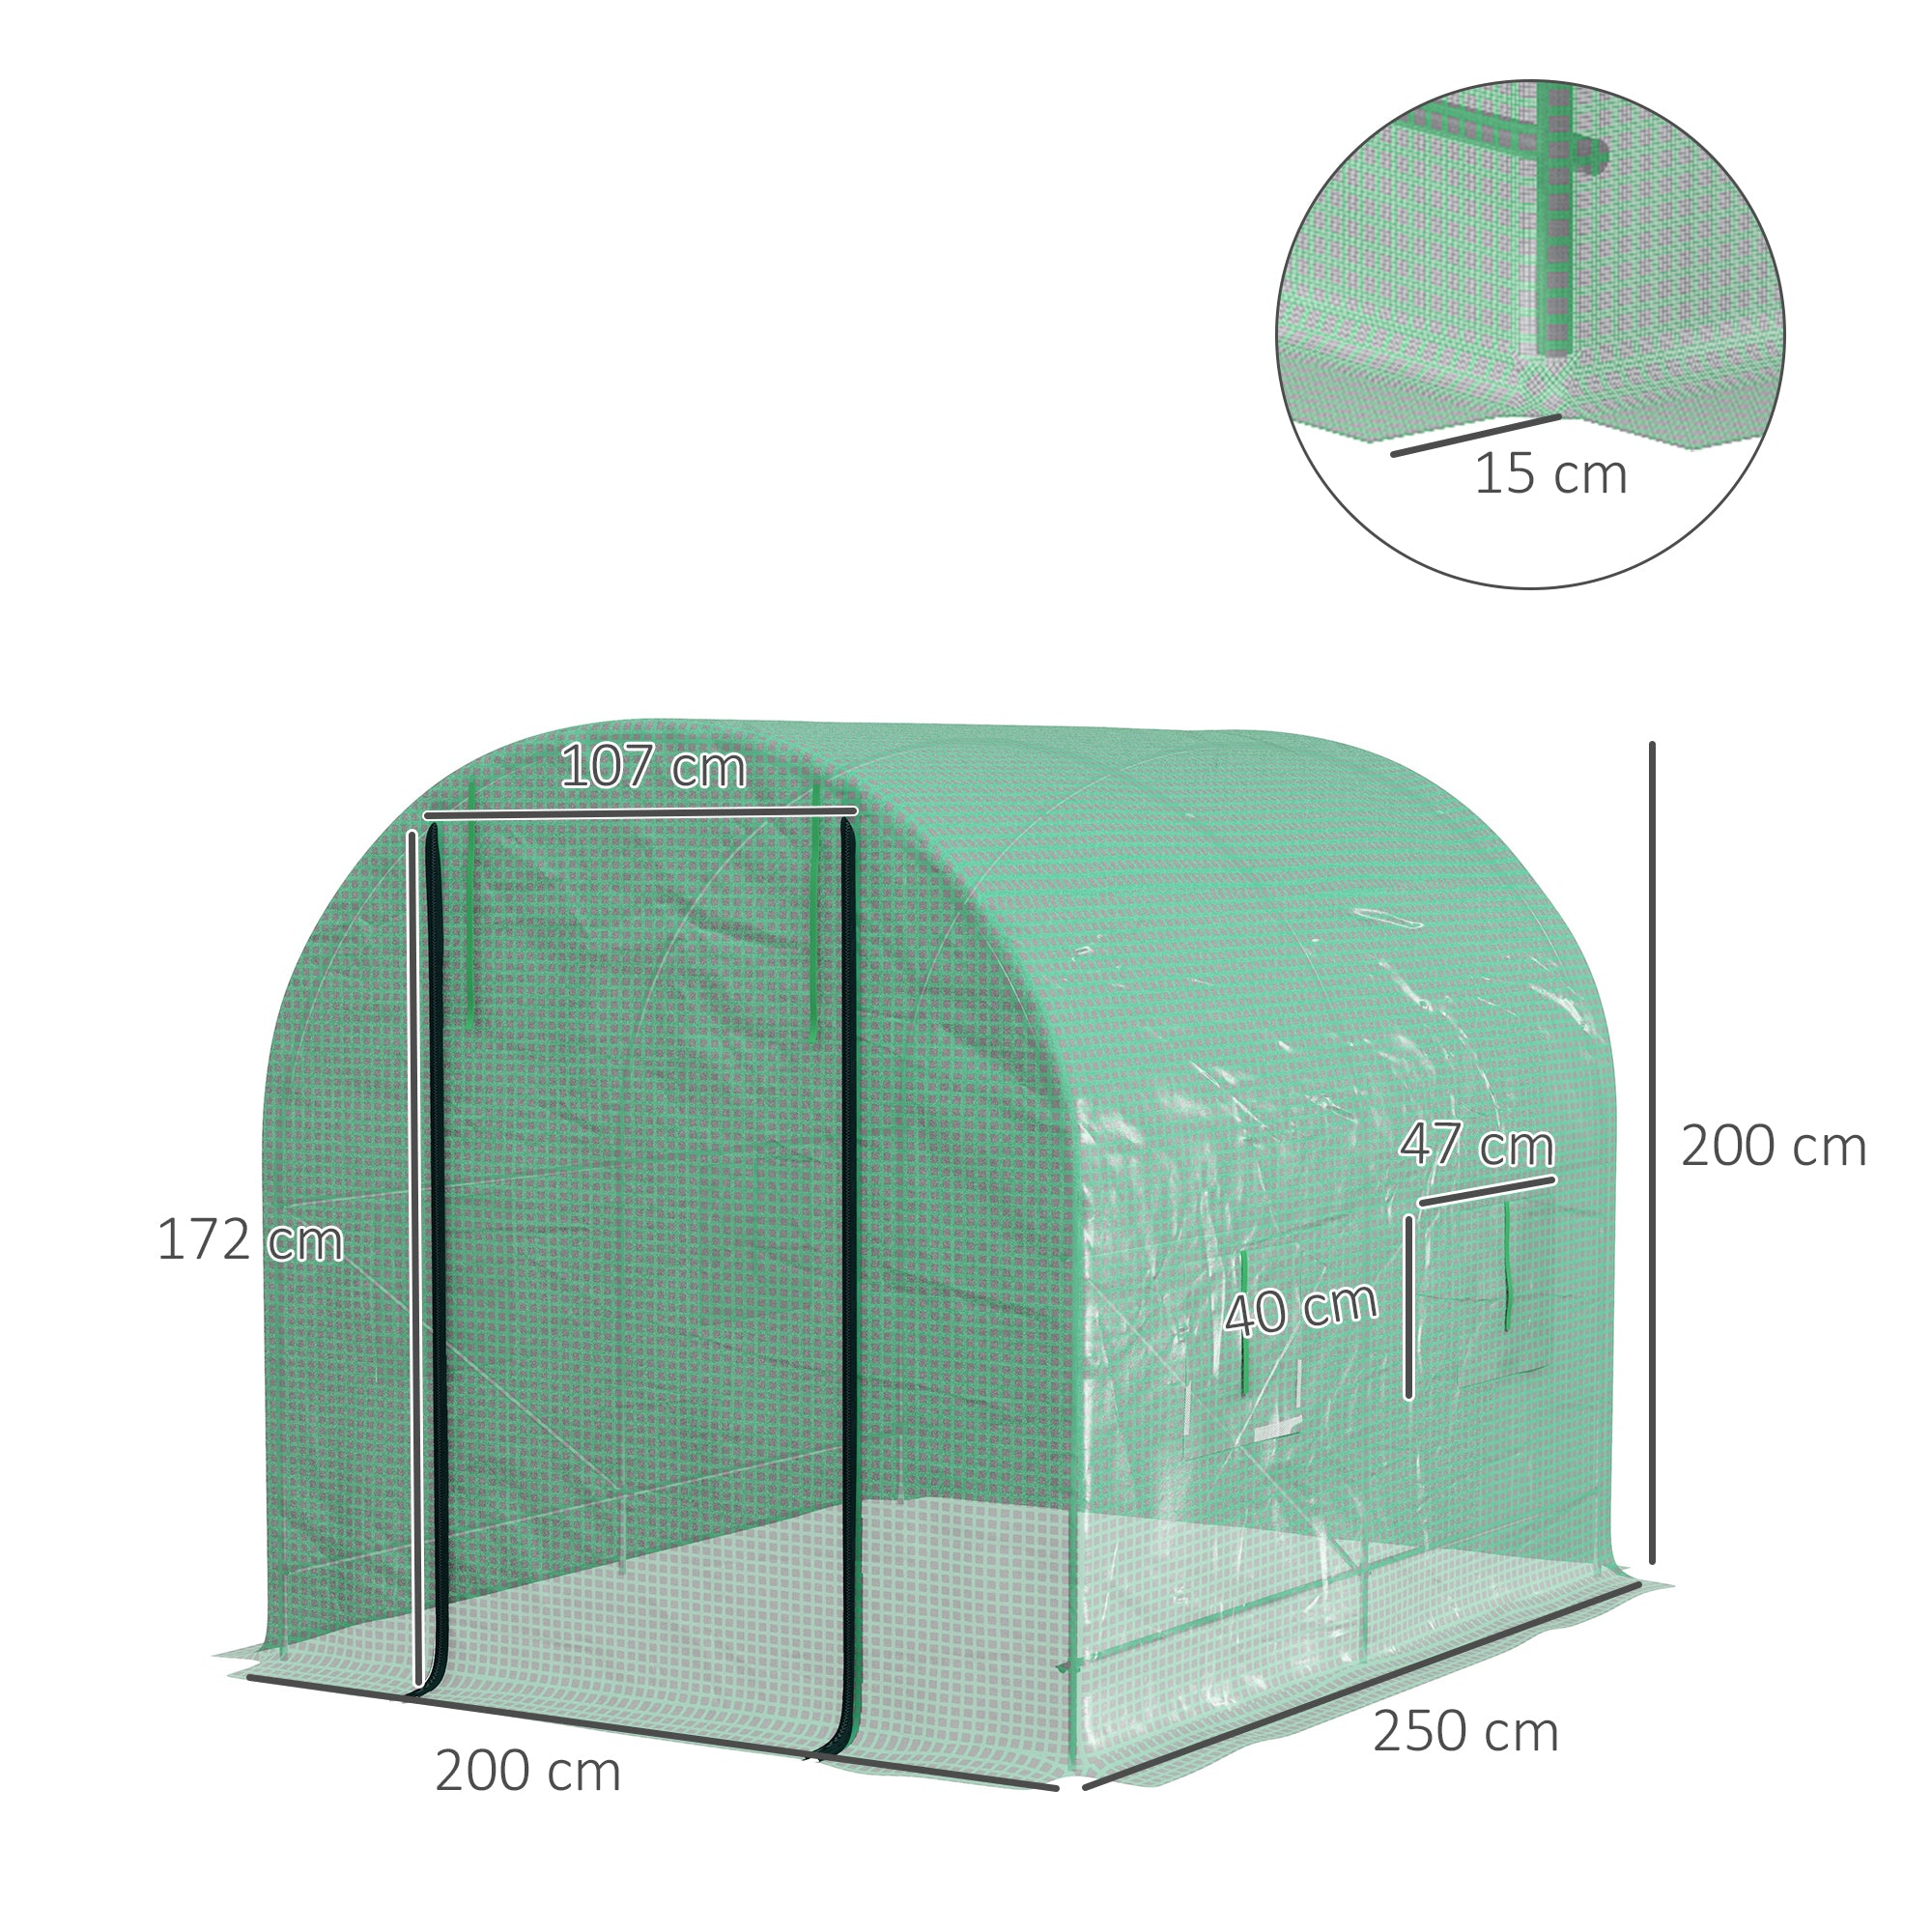 Outsunny 2.5 x 2m Walk-In Polytunnel Greenhouse, with Steel Frame, PE Cover, Roll-Up Door and 4 Windows, Green